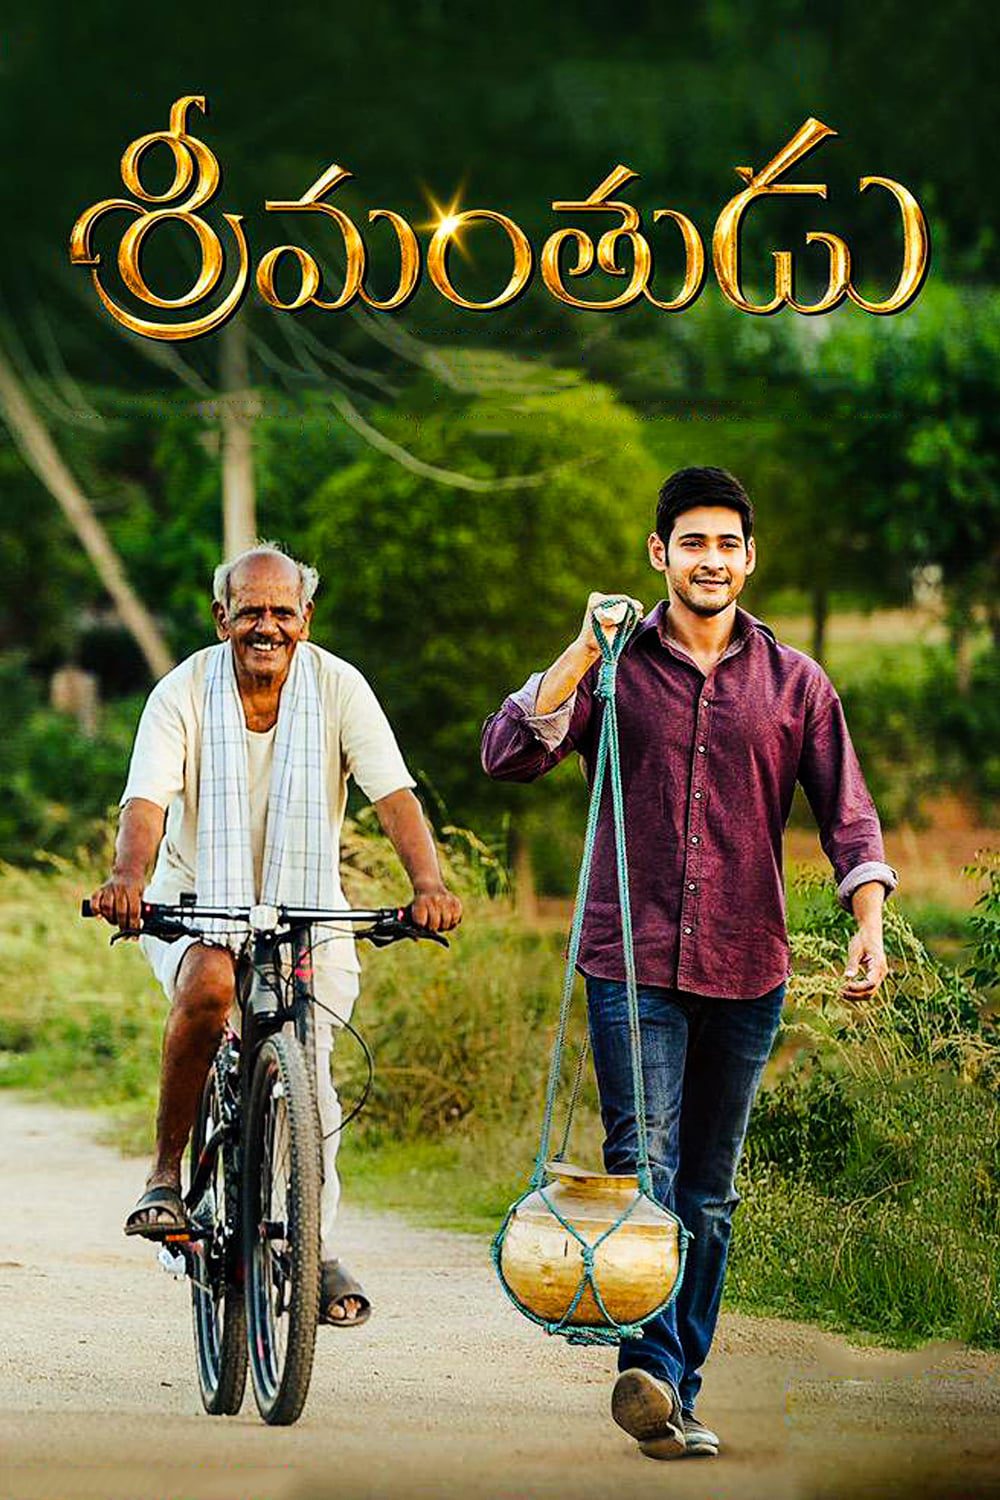 Poster for the movie "Srimanthudu"